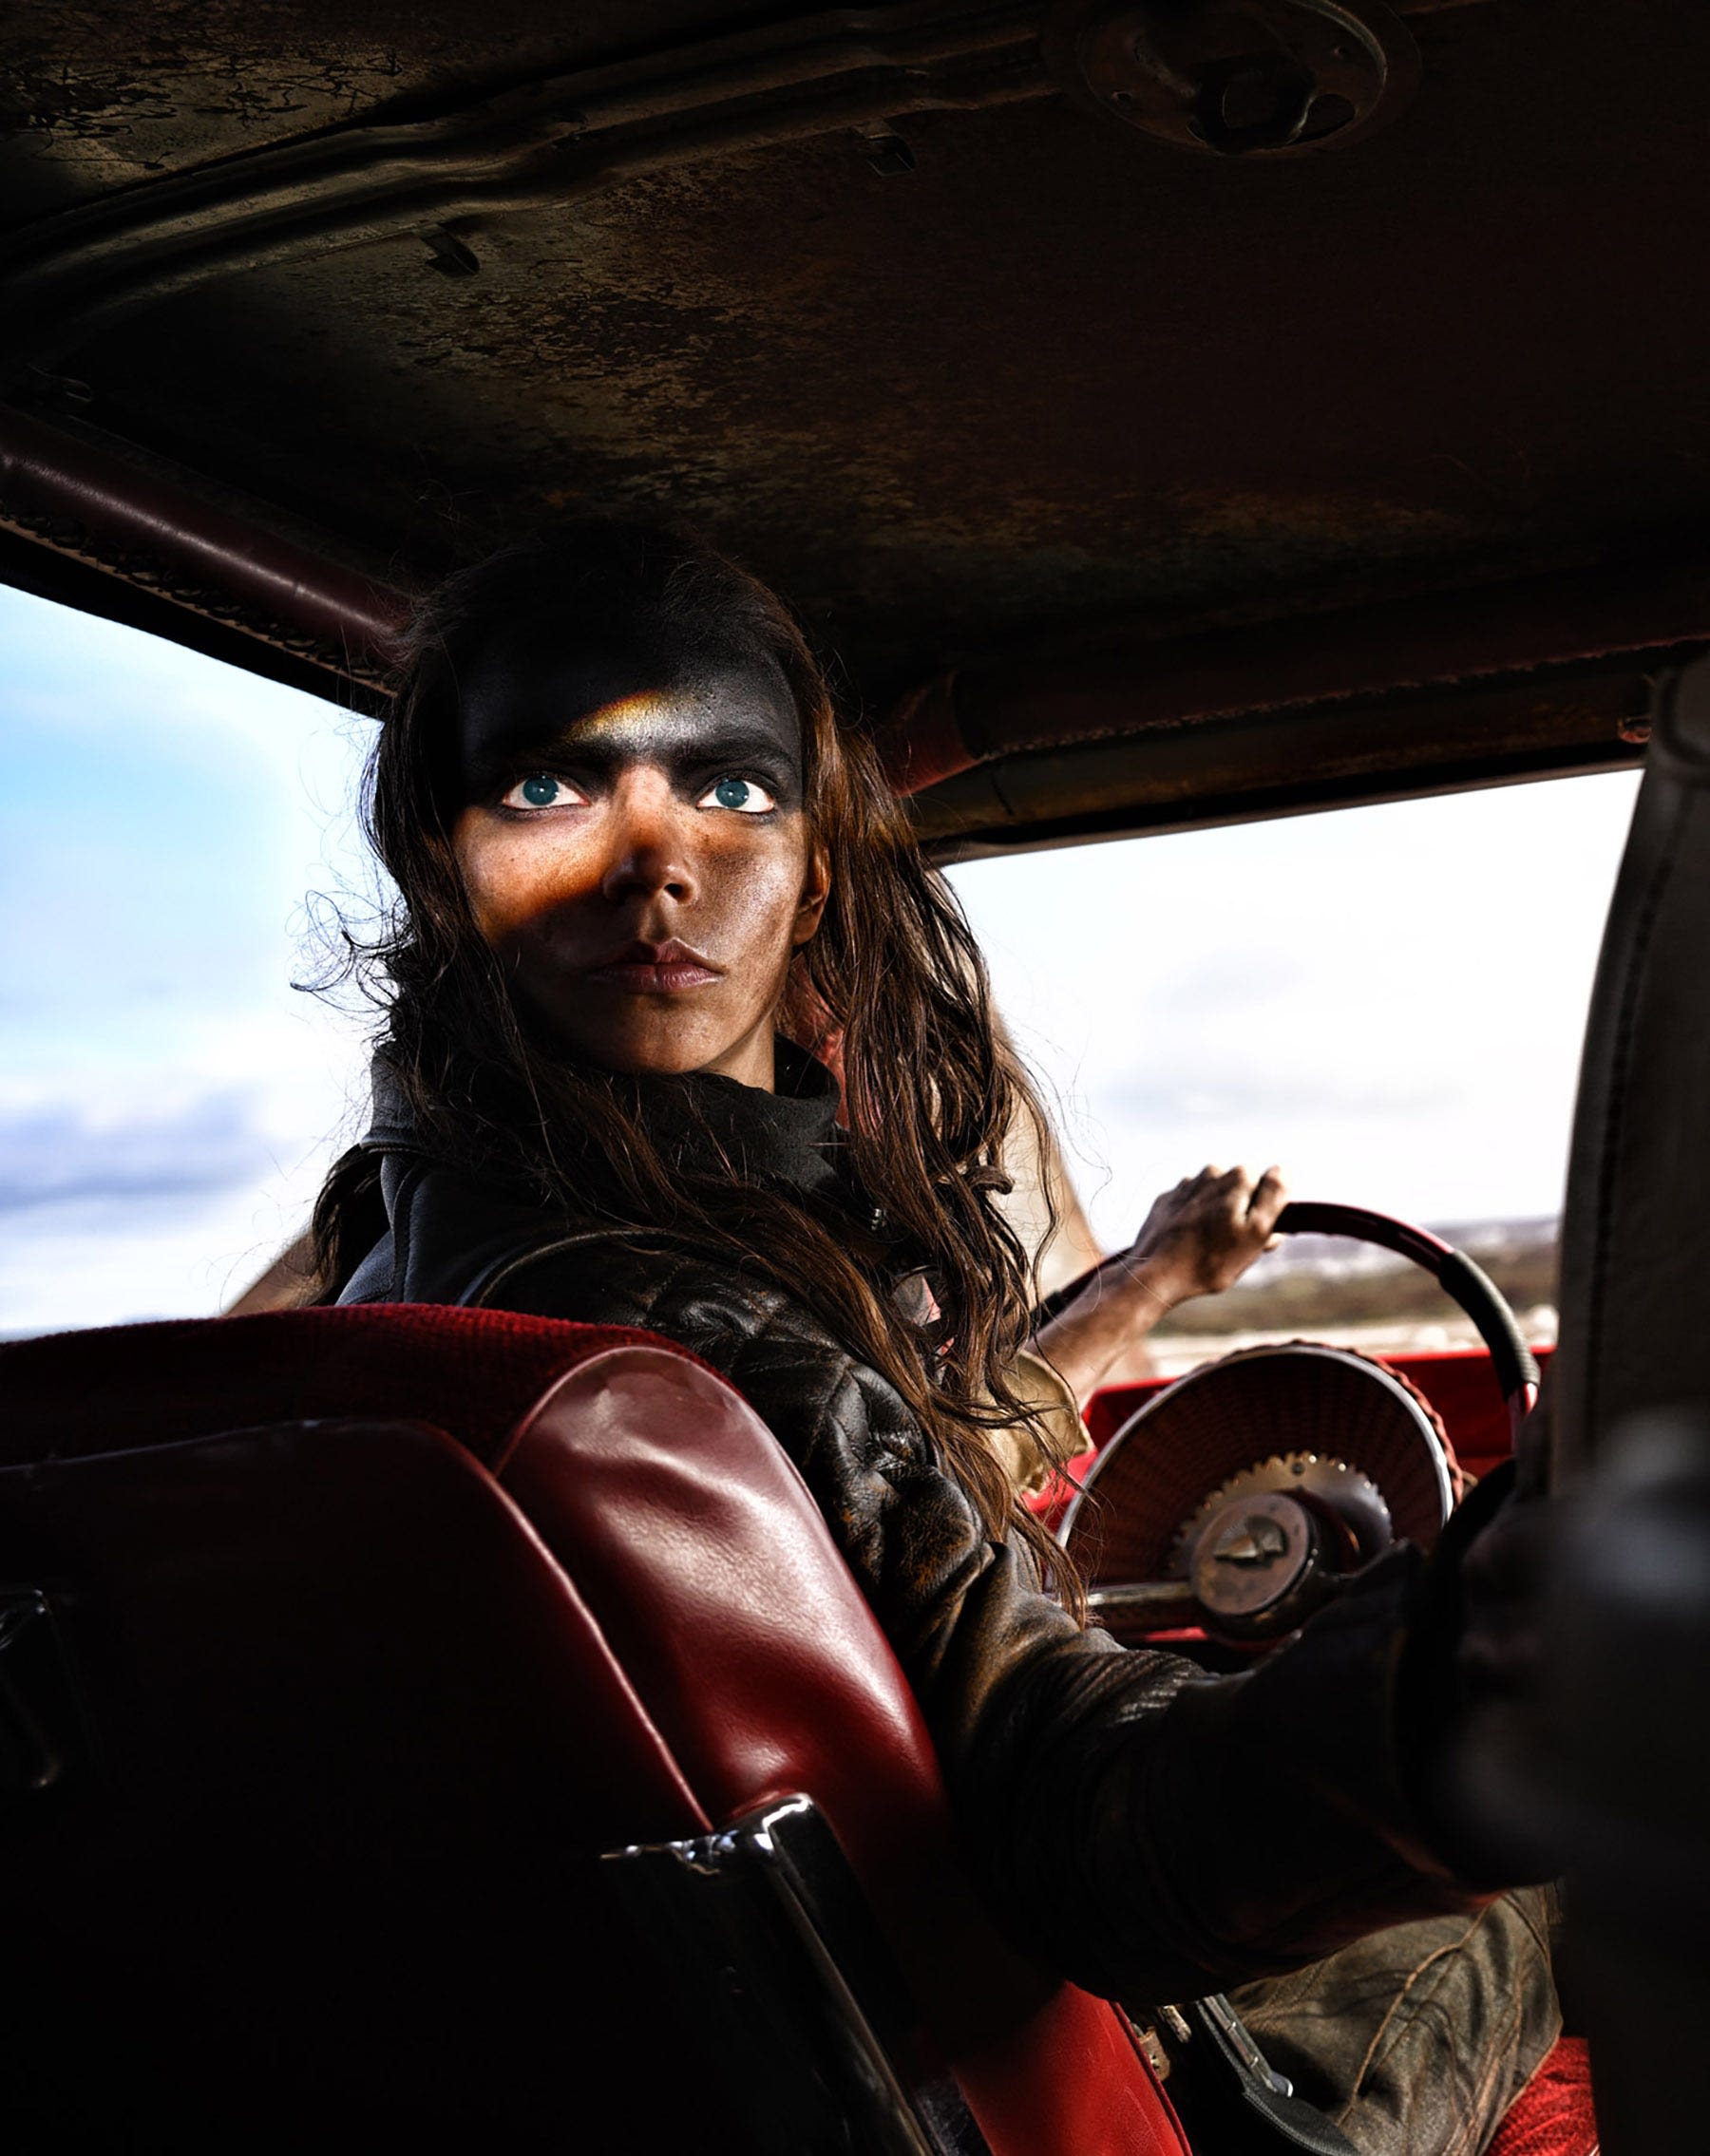 Watch Party: Thrill to 'Mad Max' movie 'Furiosa,' get freaky with streaming show 'Evil'